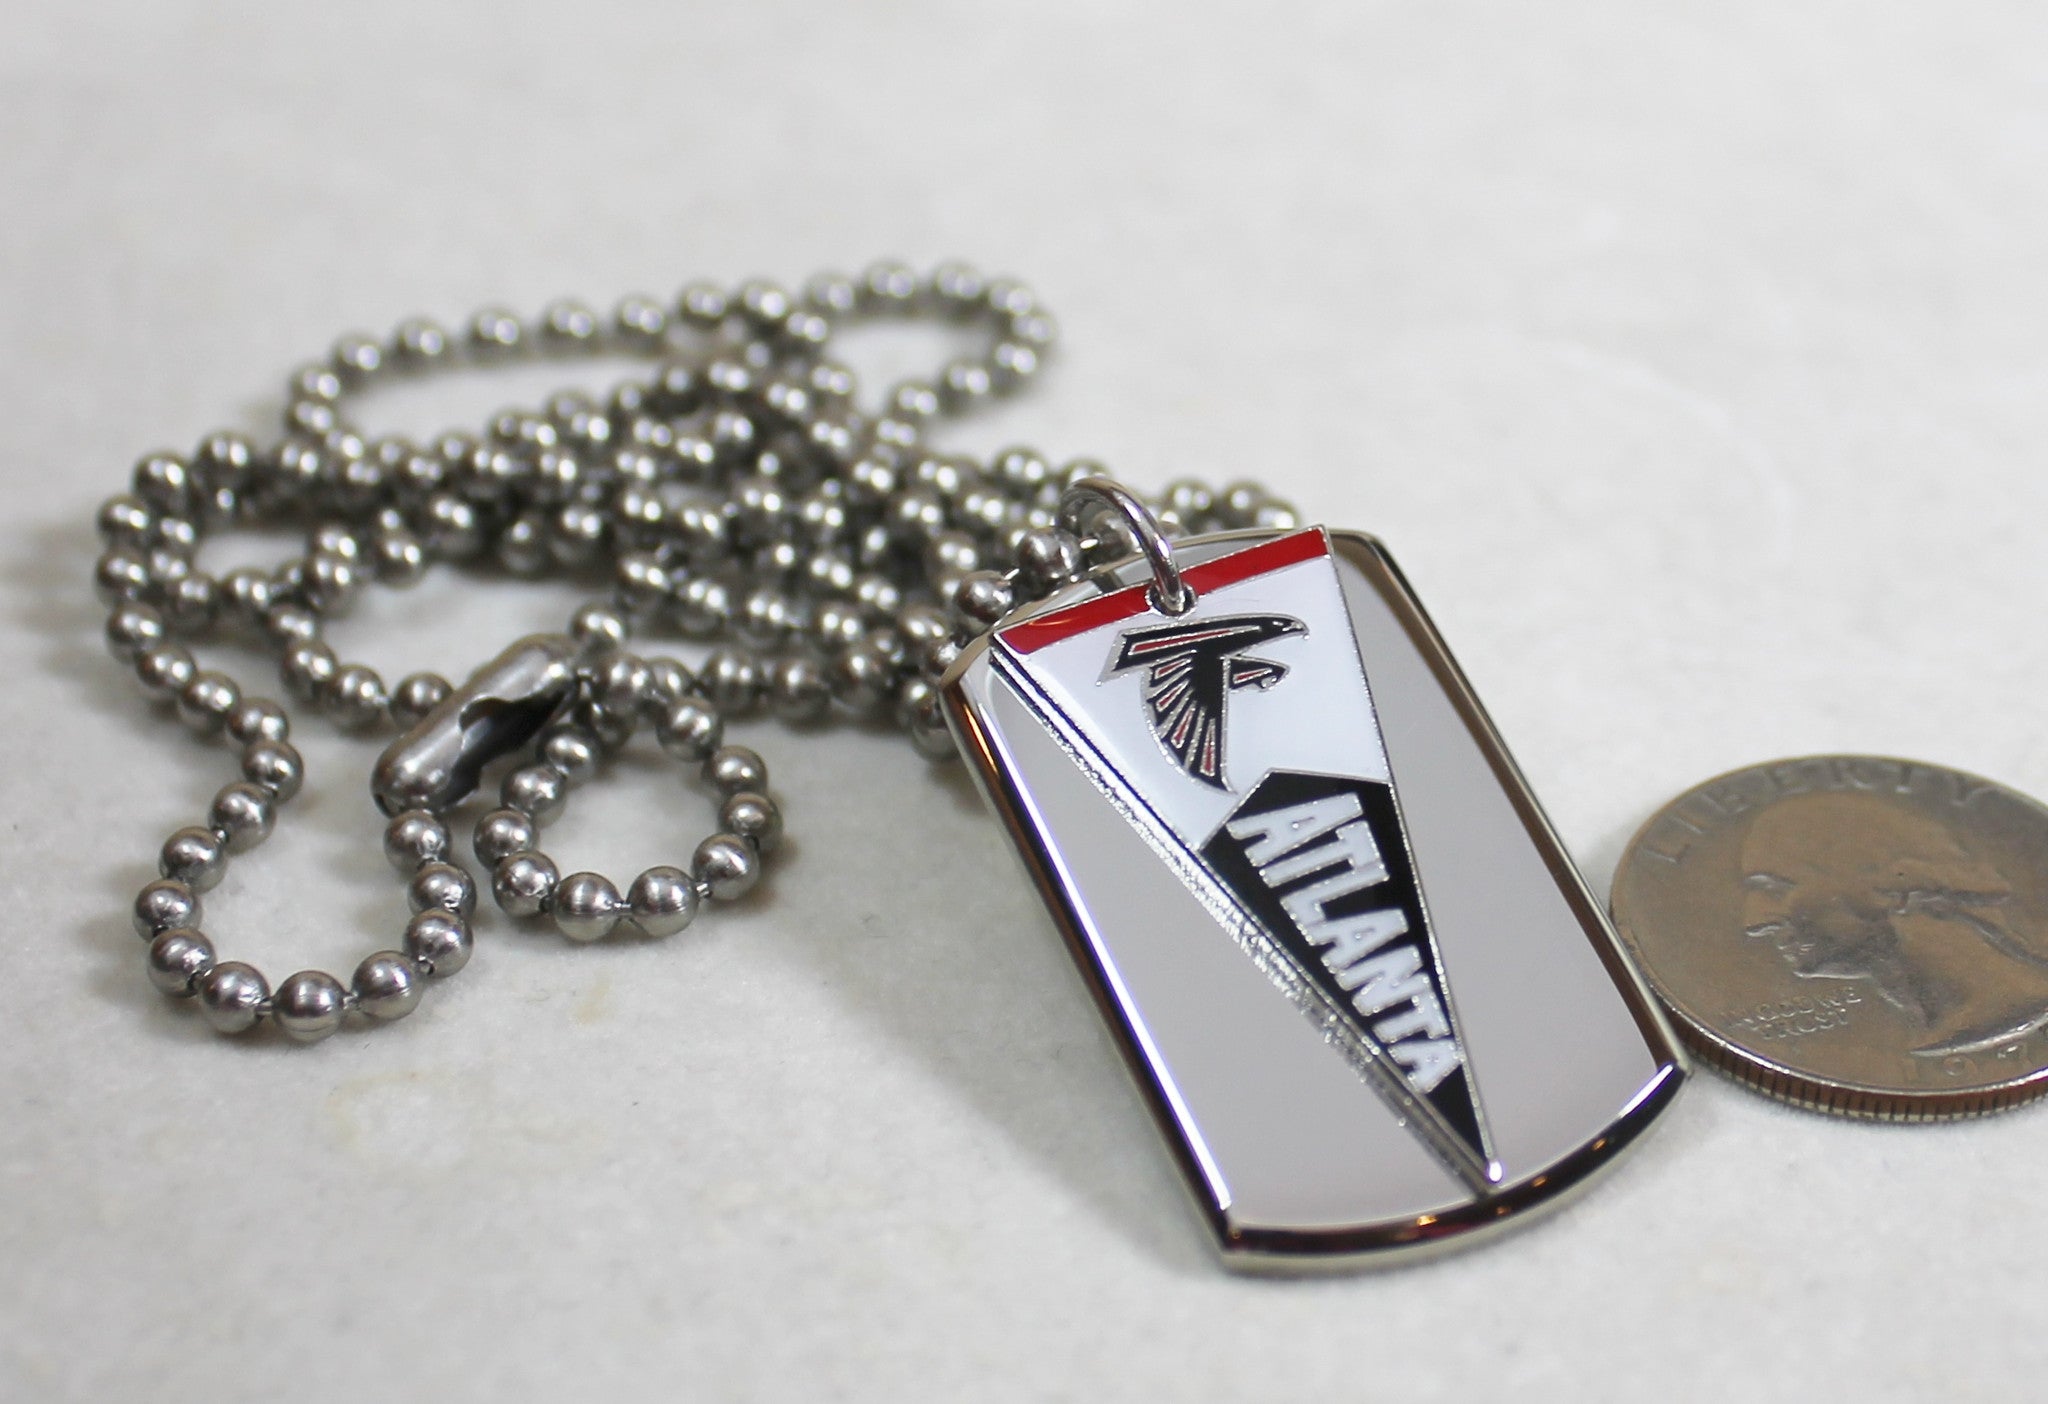 Atlanta Falcons NFL pennant stainless steel dog tag necklace 3D ball chain - Samstagsandmore